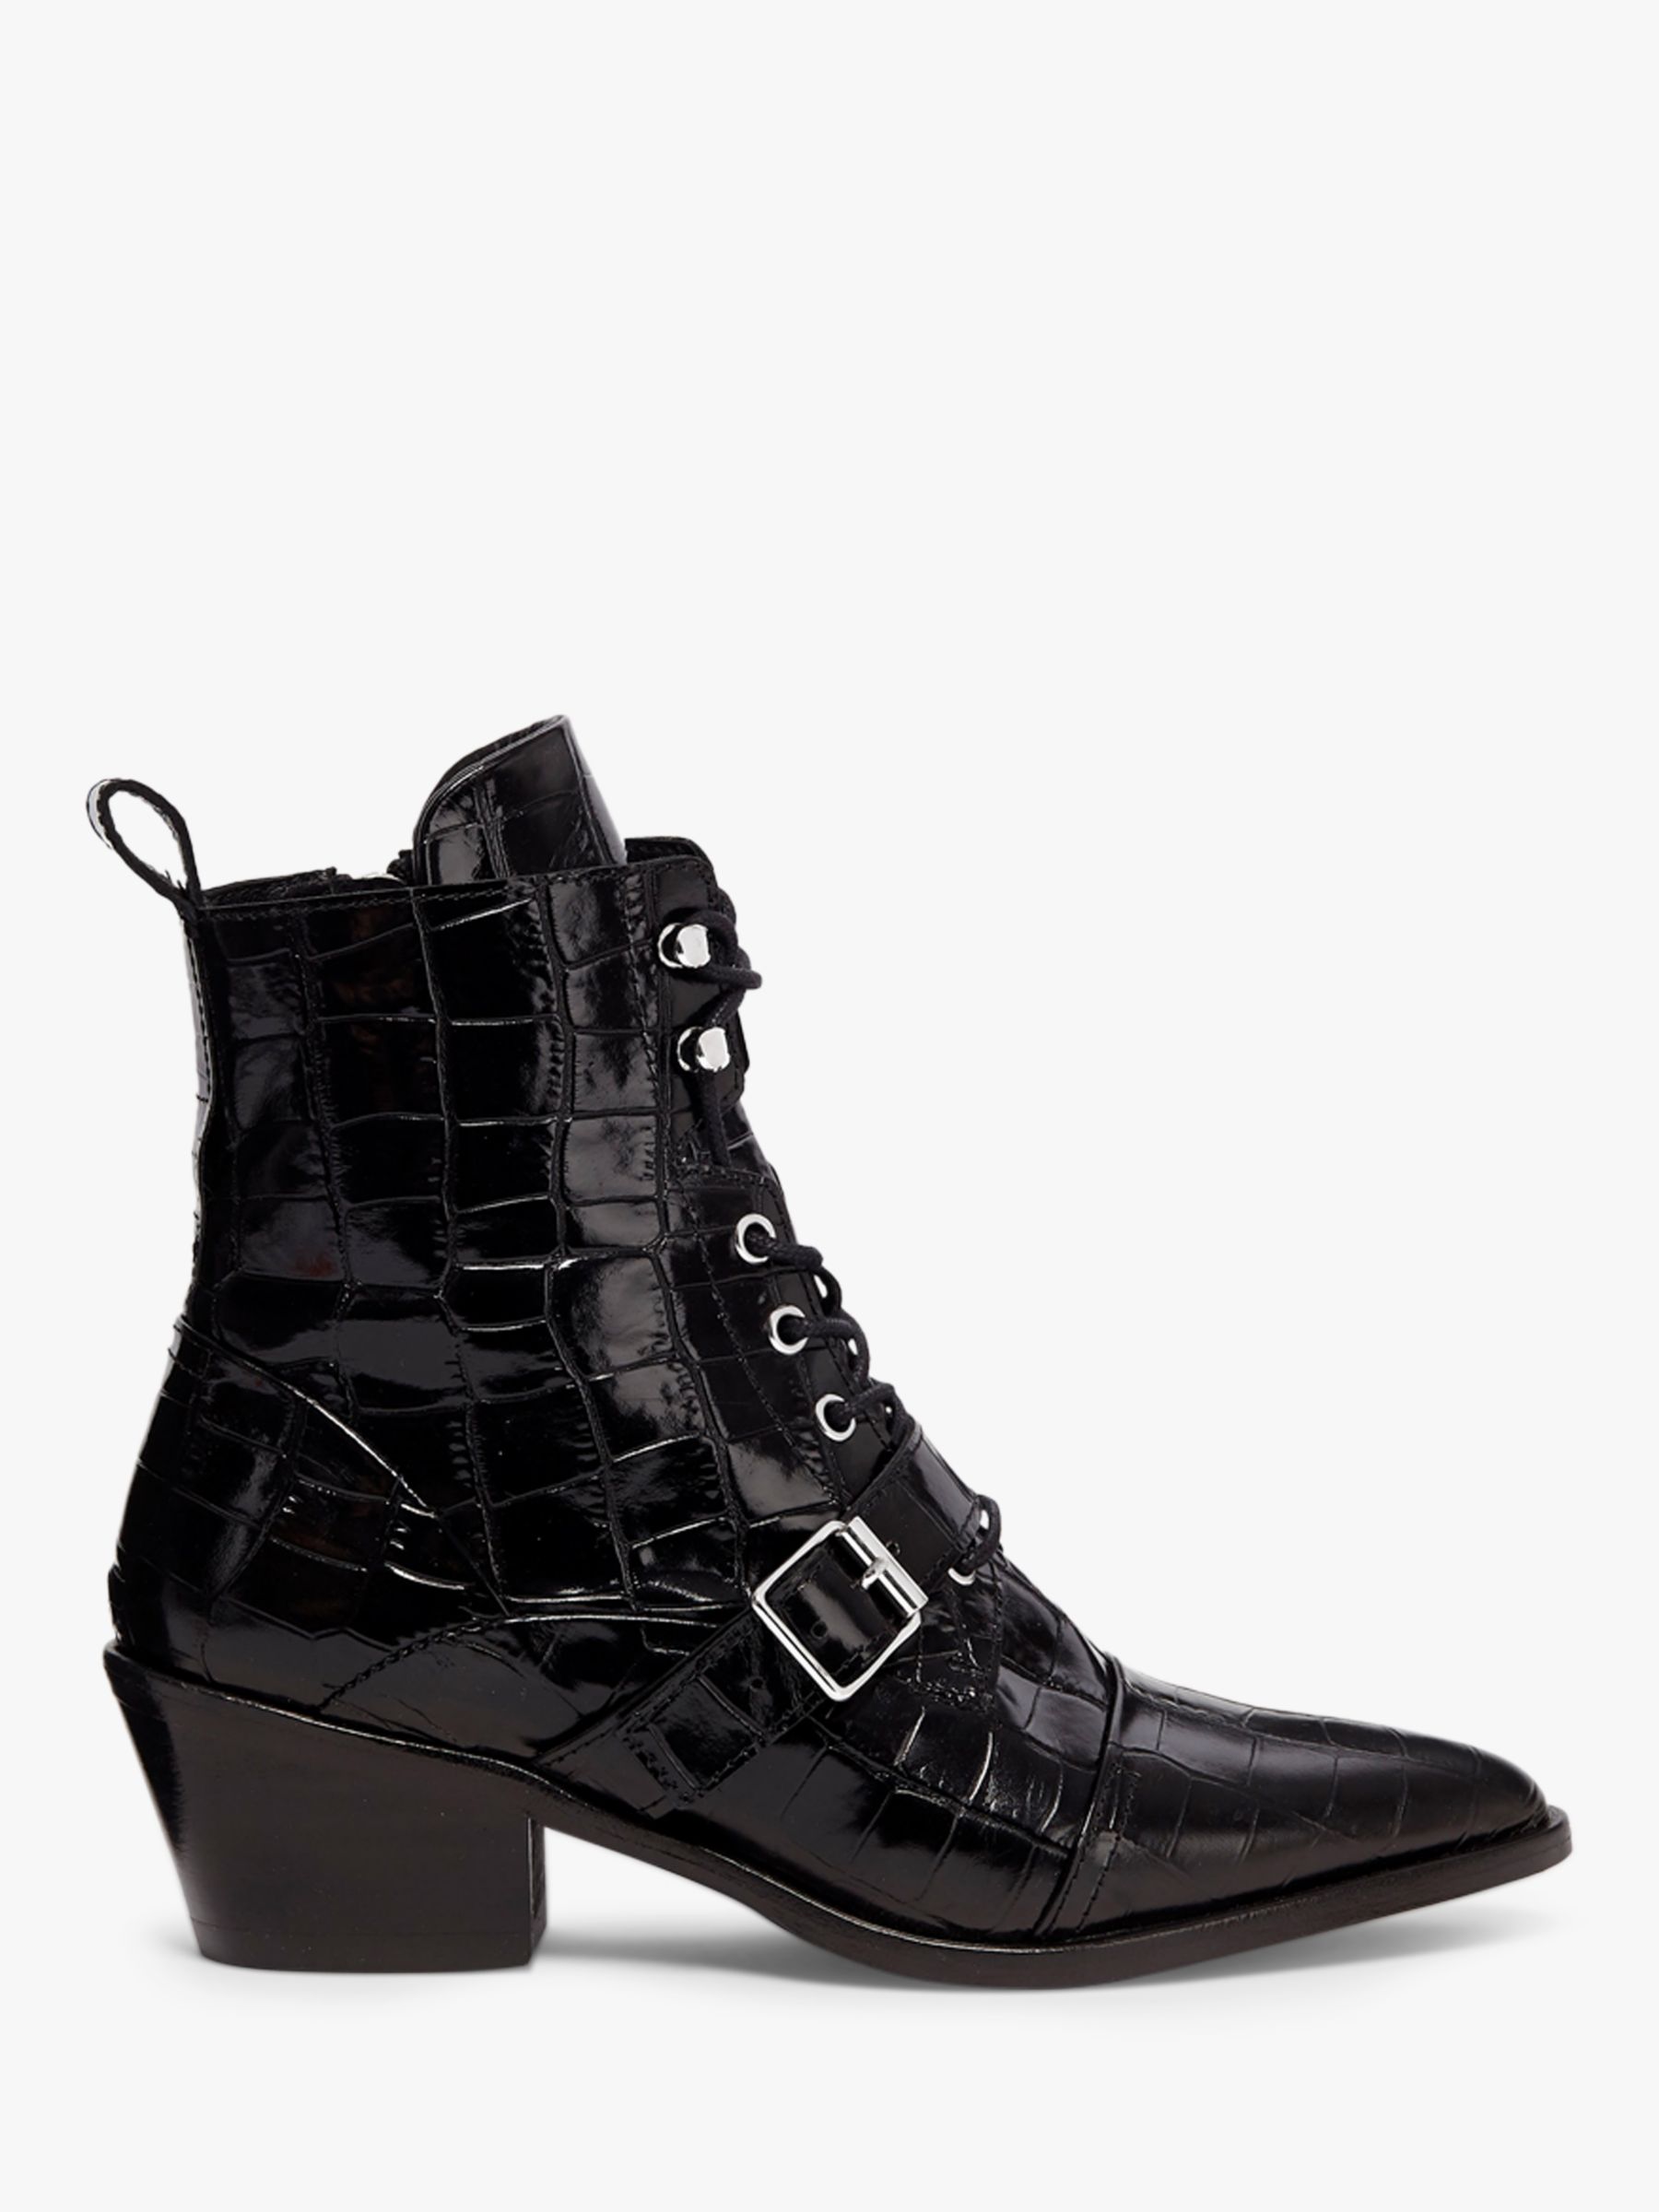 AllSaints Katy Crocodile Leather Pointed Ankle Boots, Black at John ...